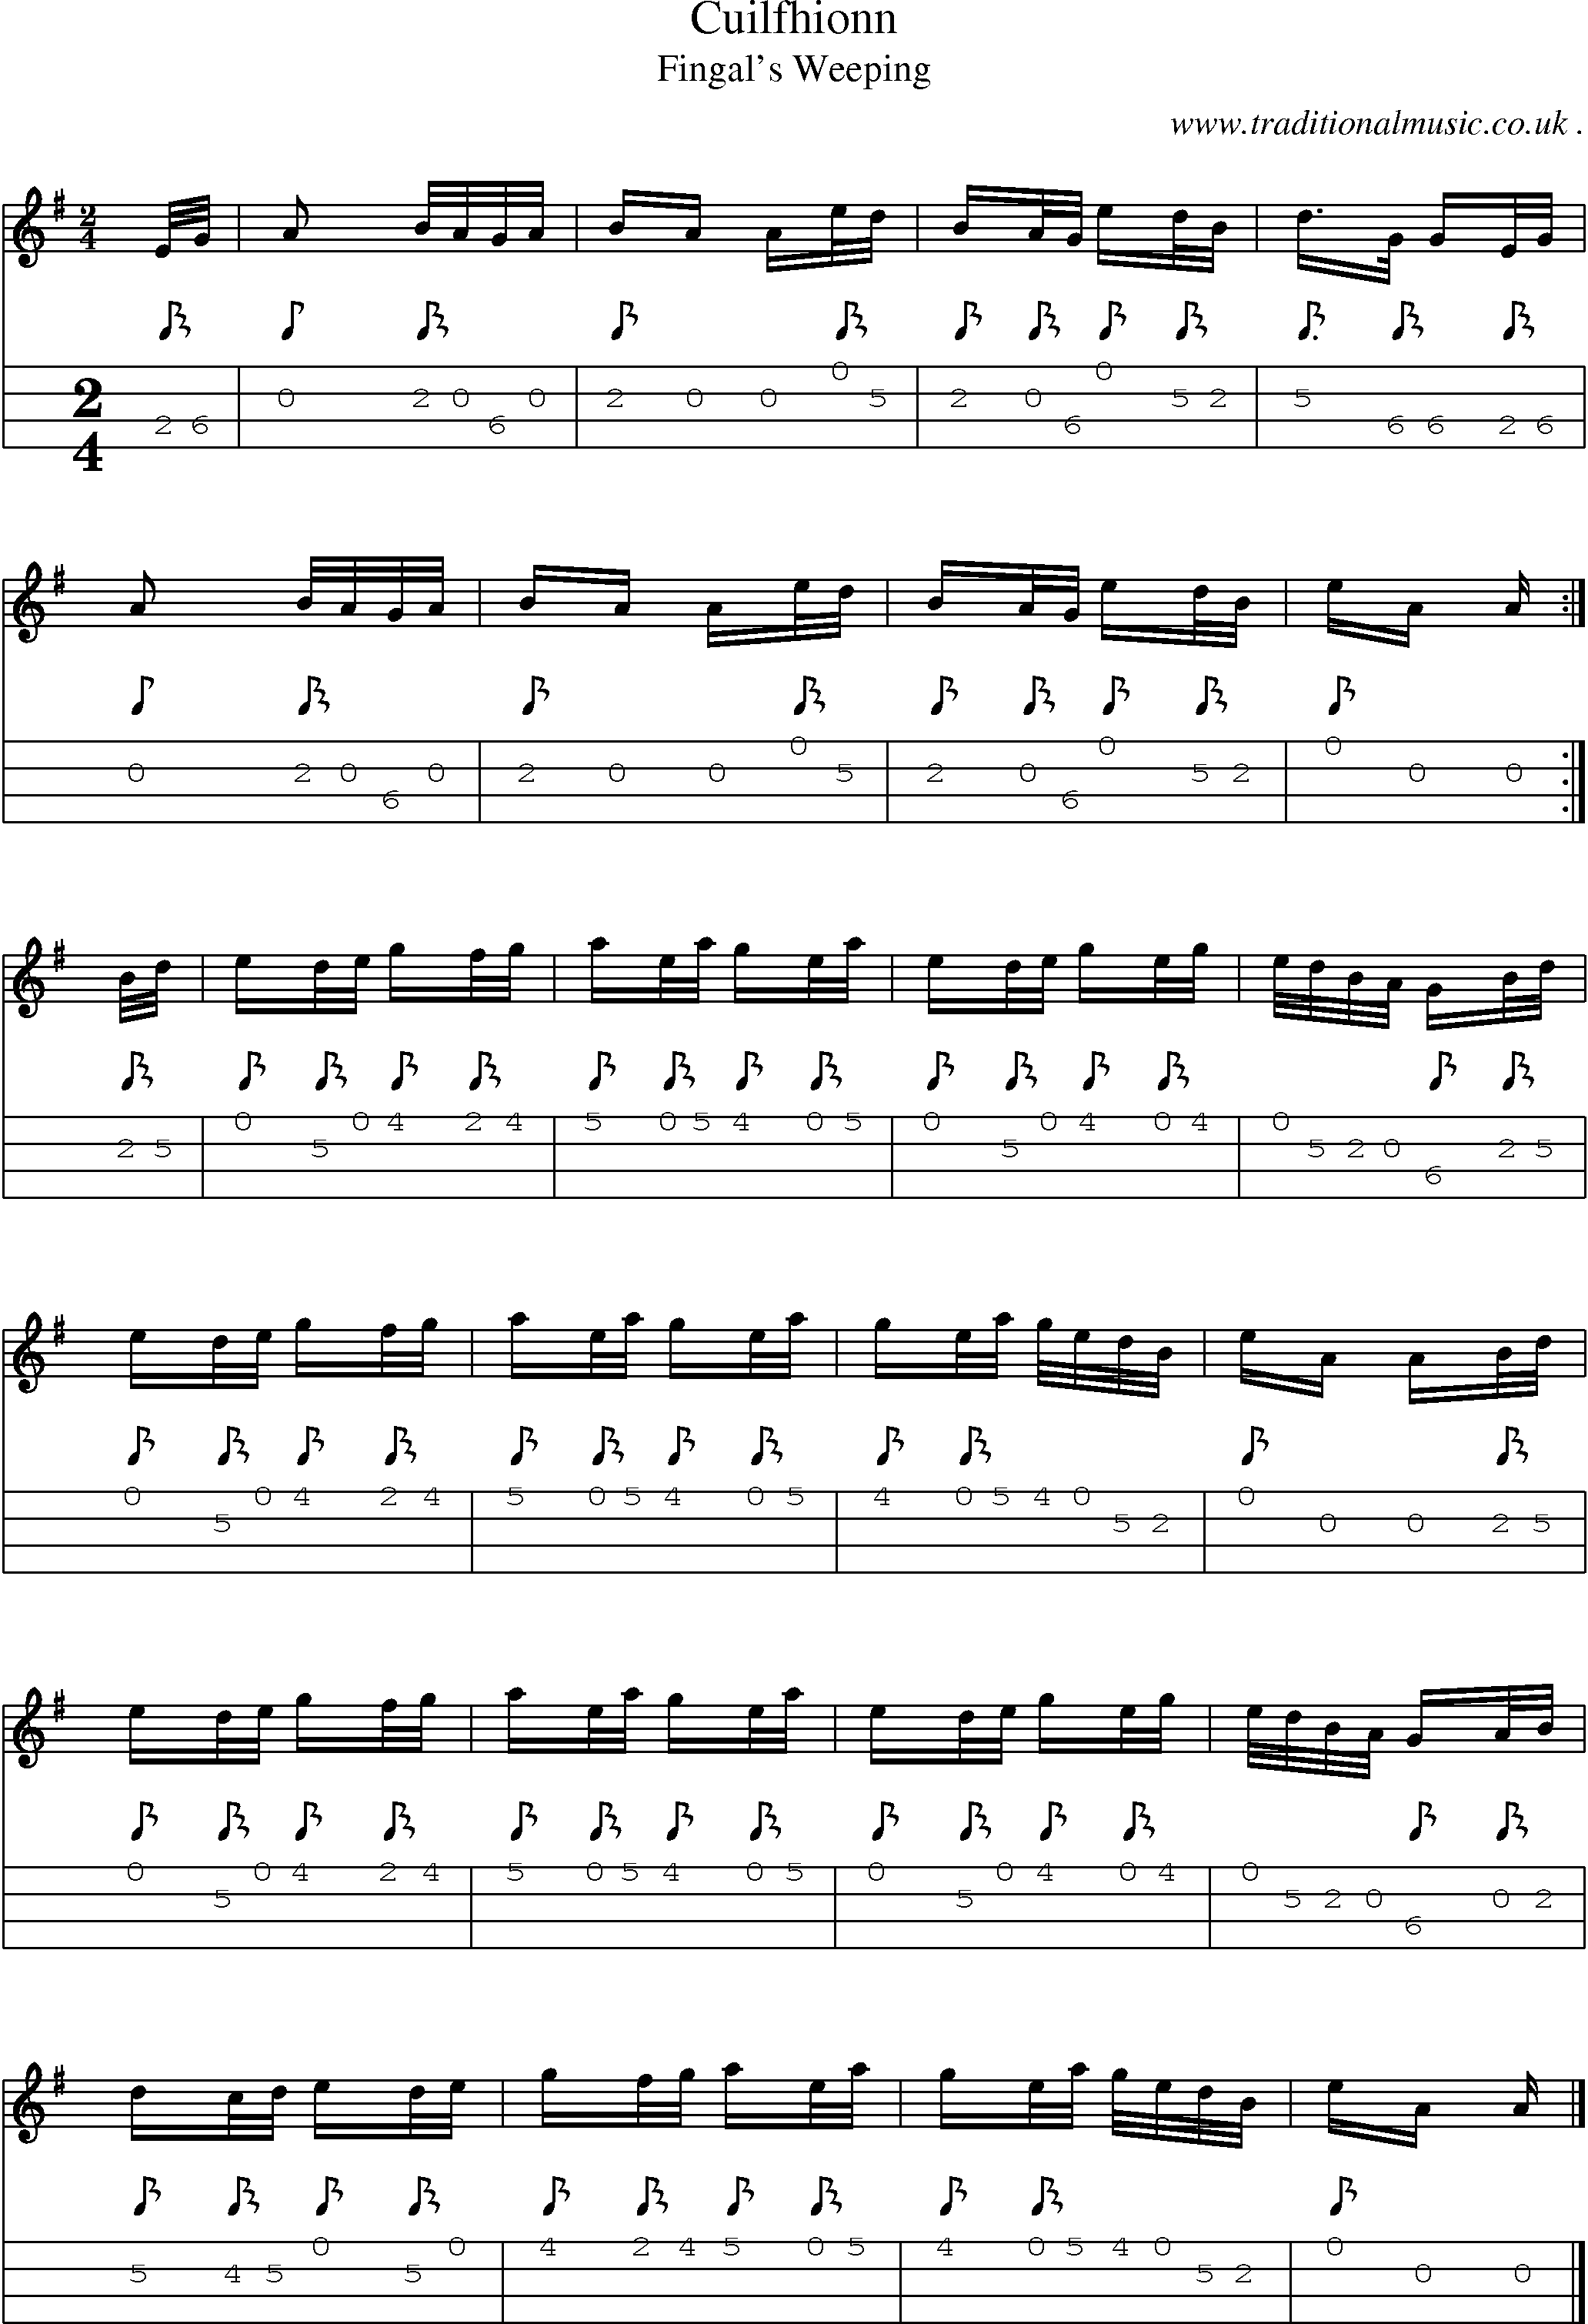 Sheet-music  score, Chords and Mandolin Tabs for Cuilfhionn